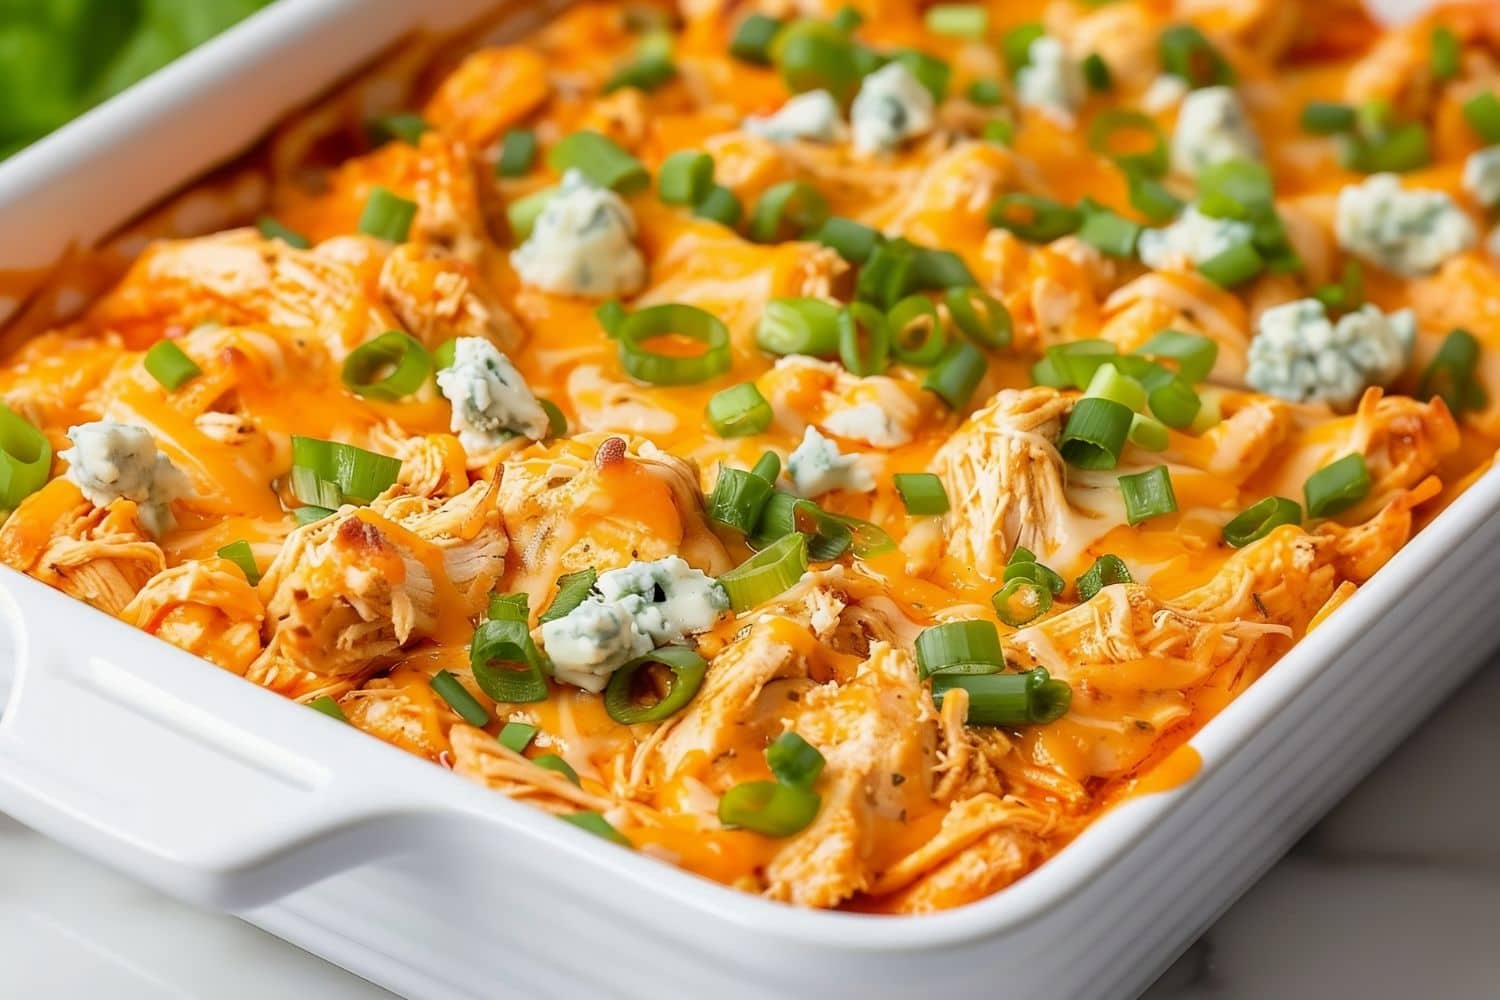 Frank's Buffalo Chicken Dip with Bleu Cheese and Green Onions in a White Casserole Dish